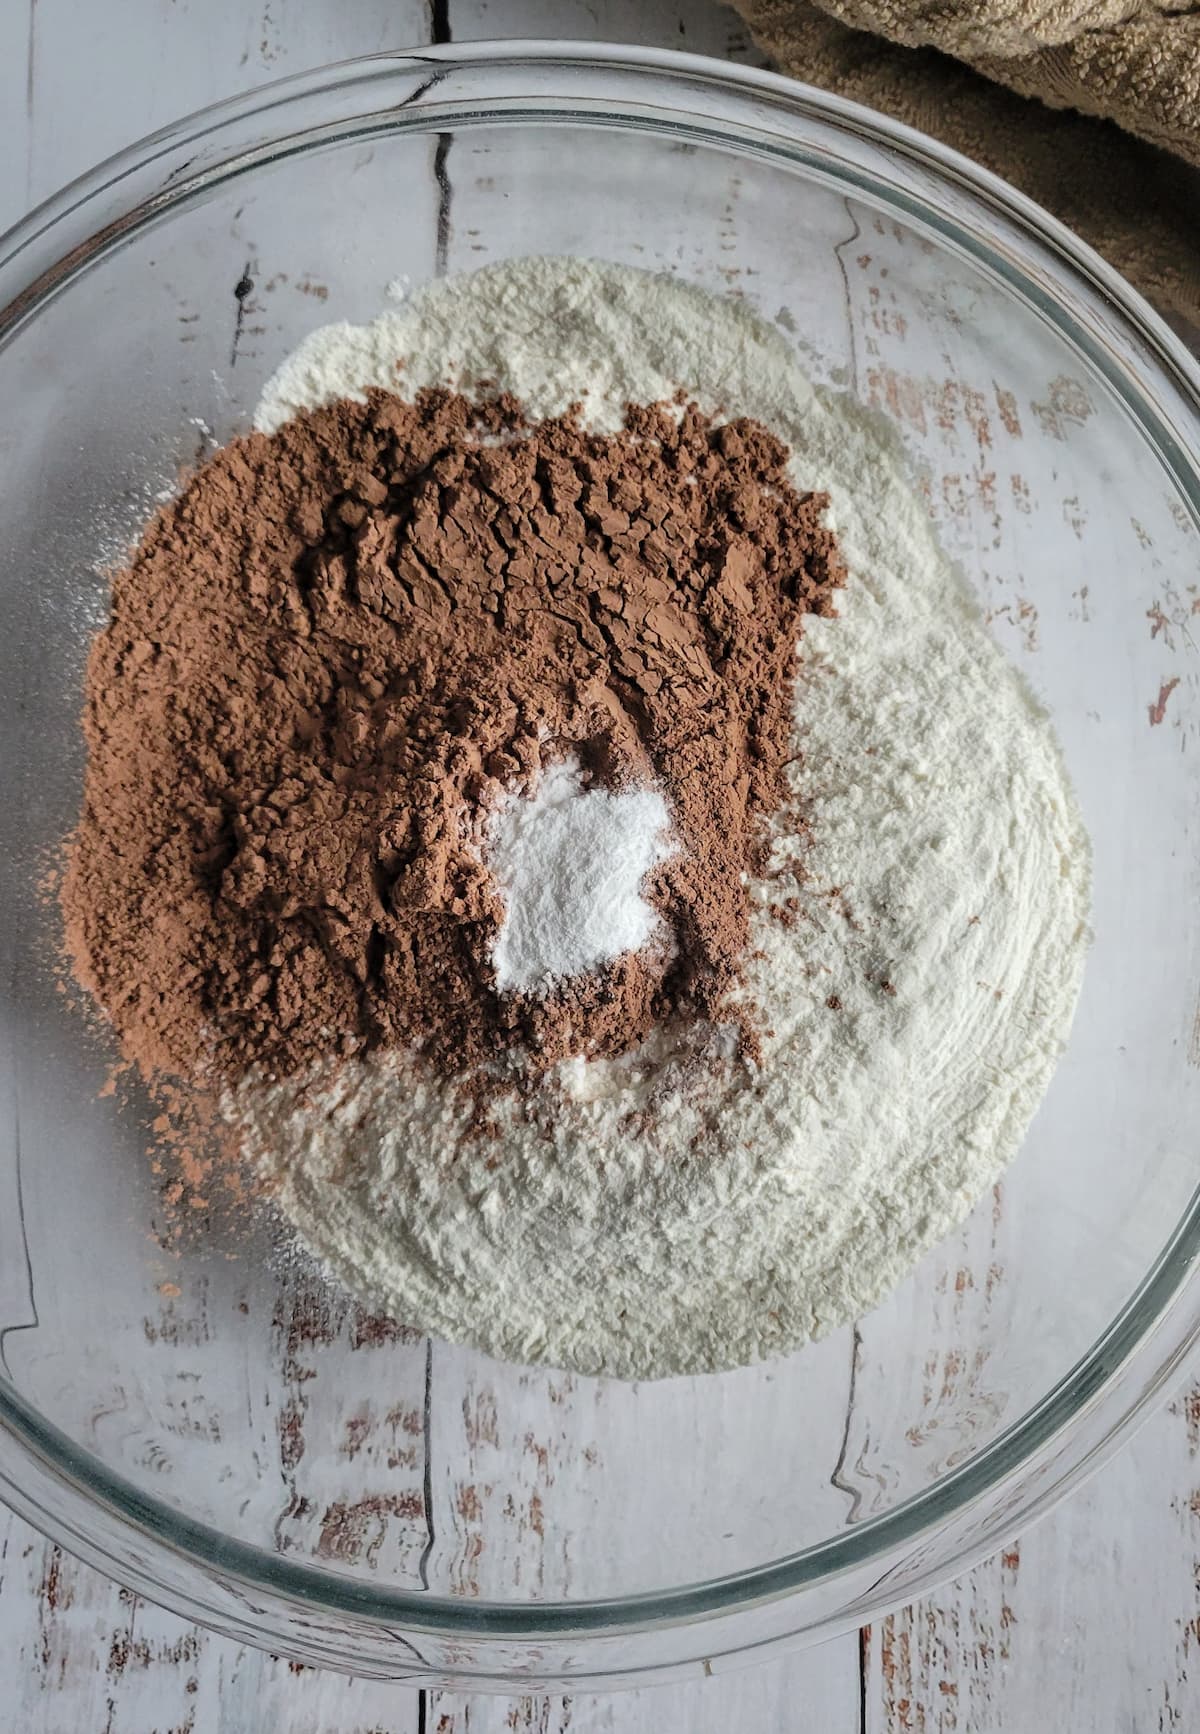 cocoa powder, flour and baking soda unmixed in a bowl